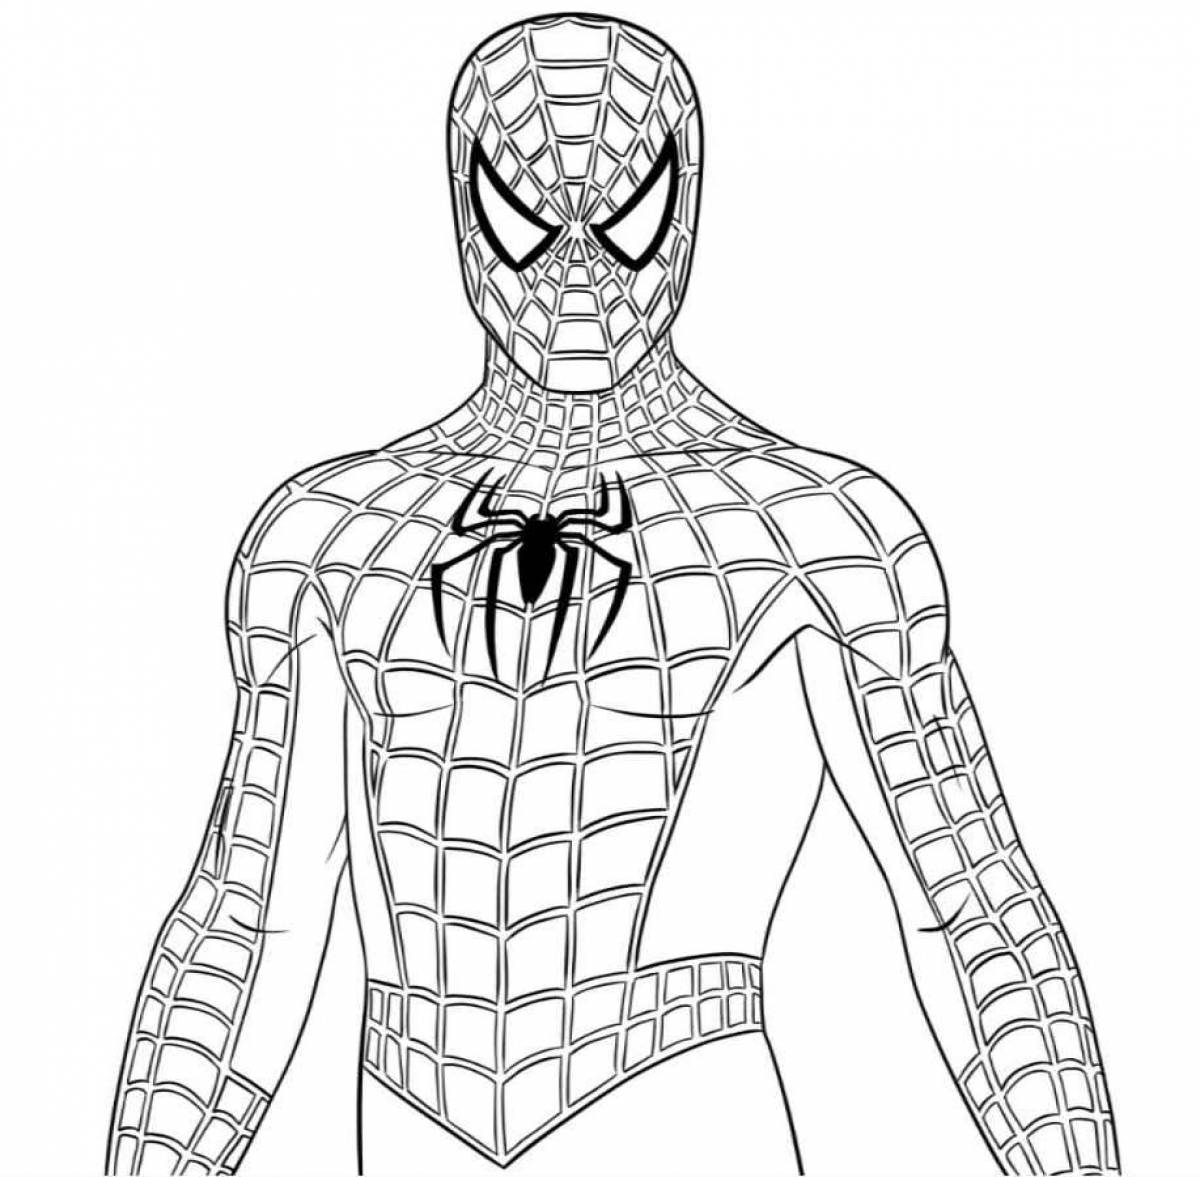 Pleasant Spiderman coloring pages for kids